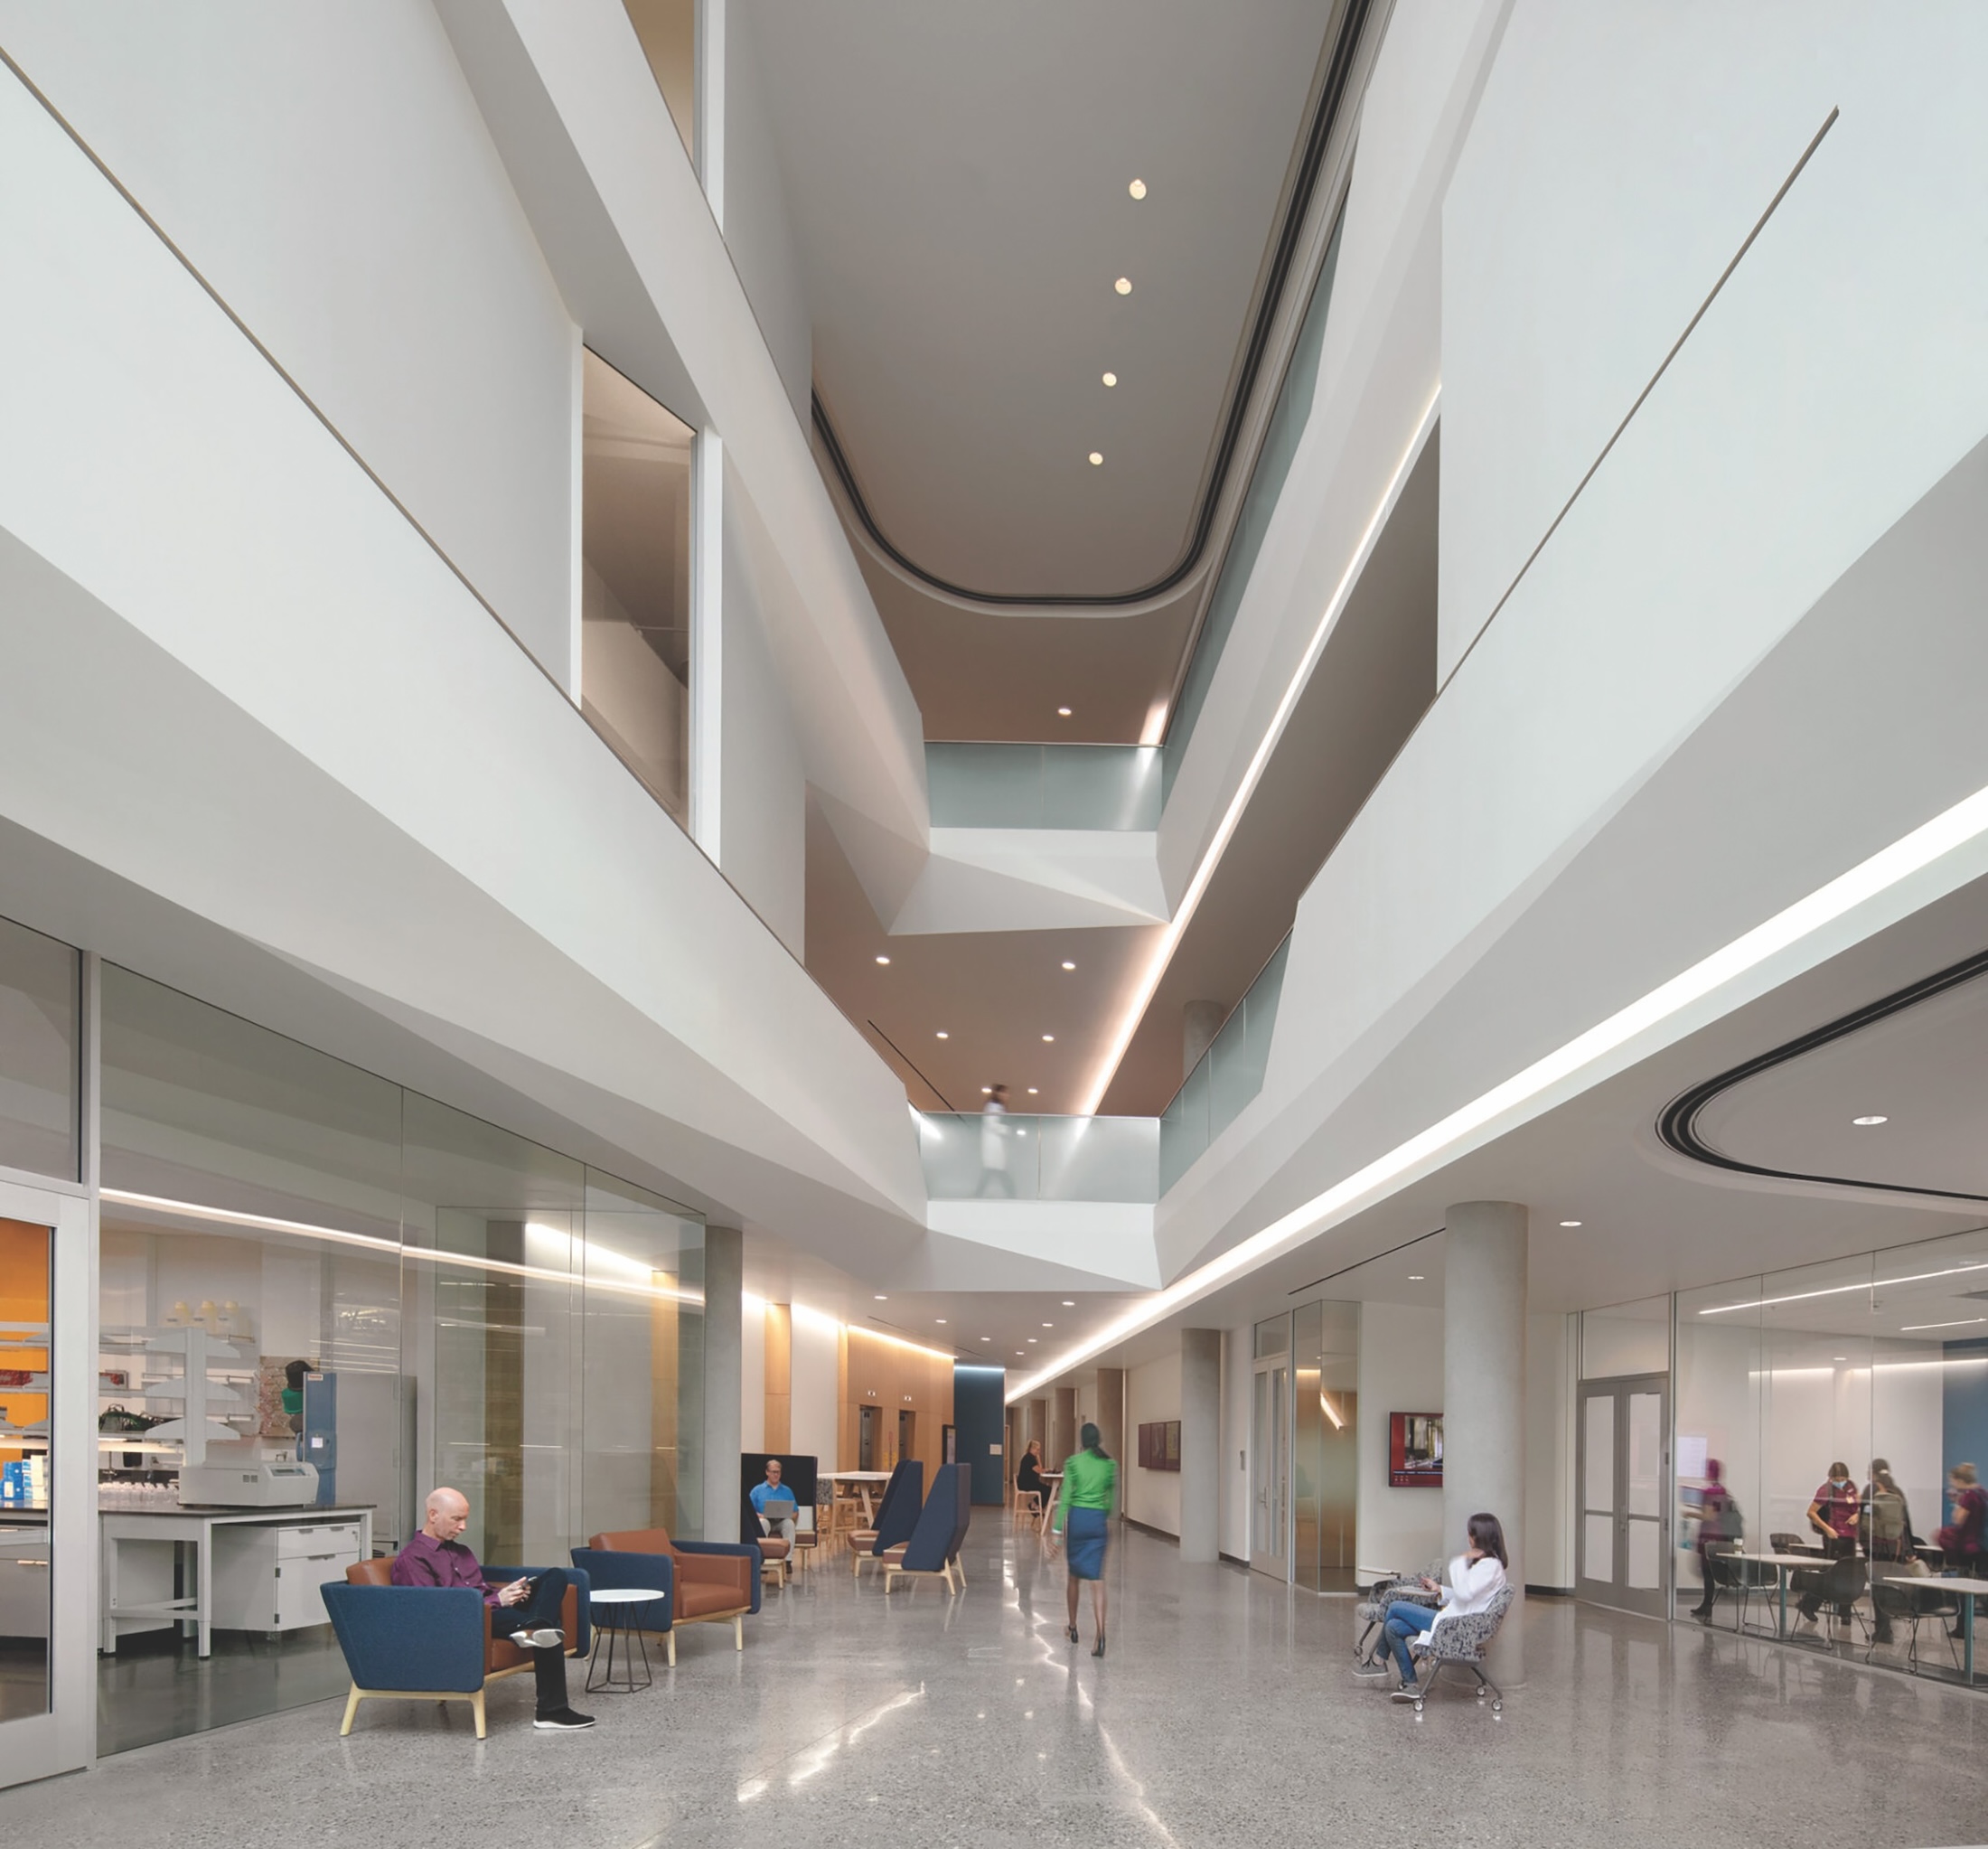 The Arizona State University + Mayo Clinic medical research facilityphoto Charlie Leight, courtesy DPR Construction